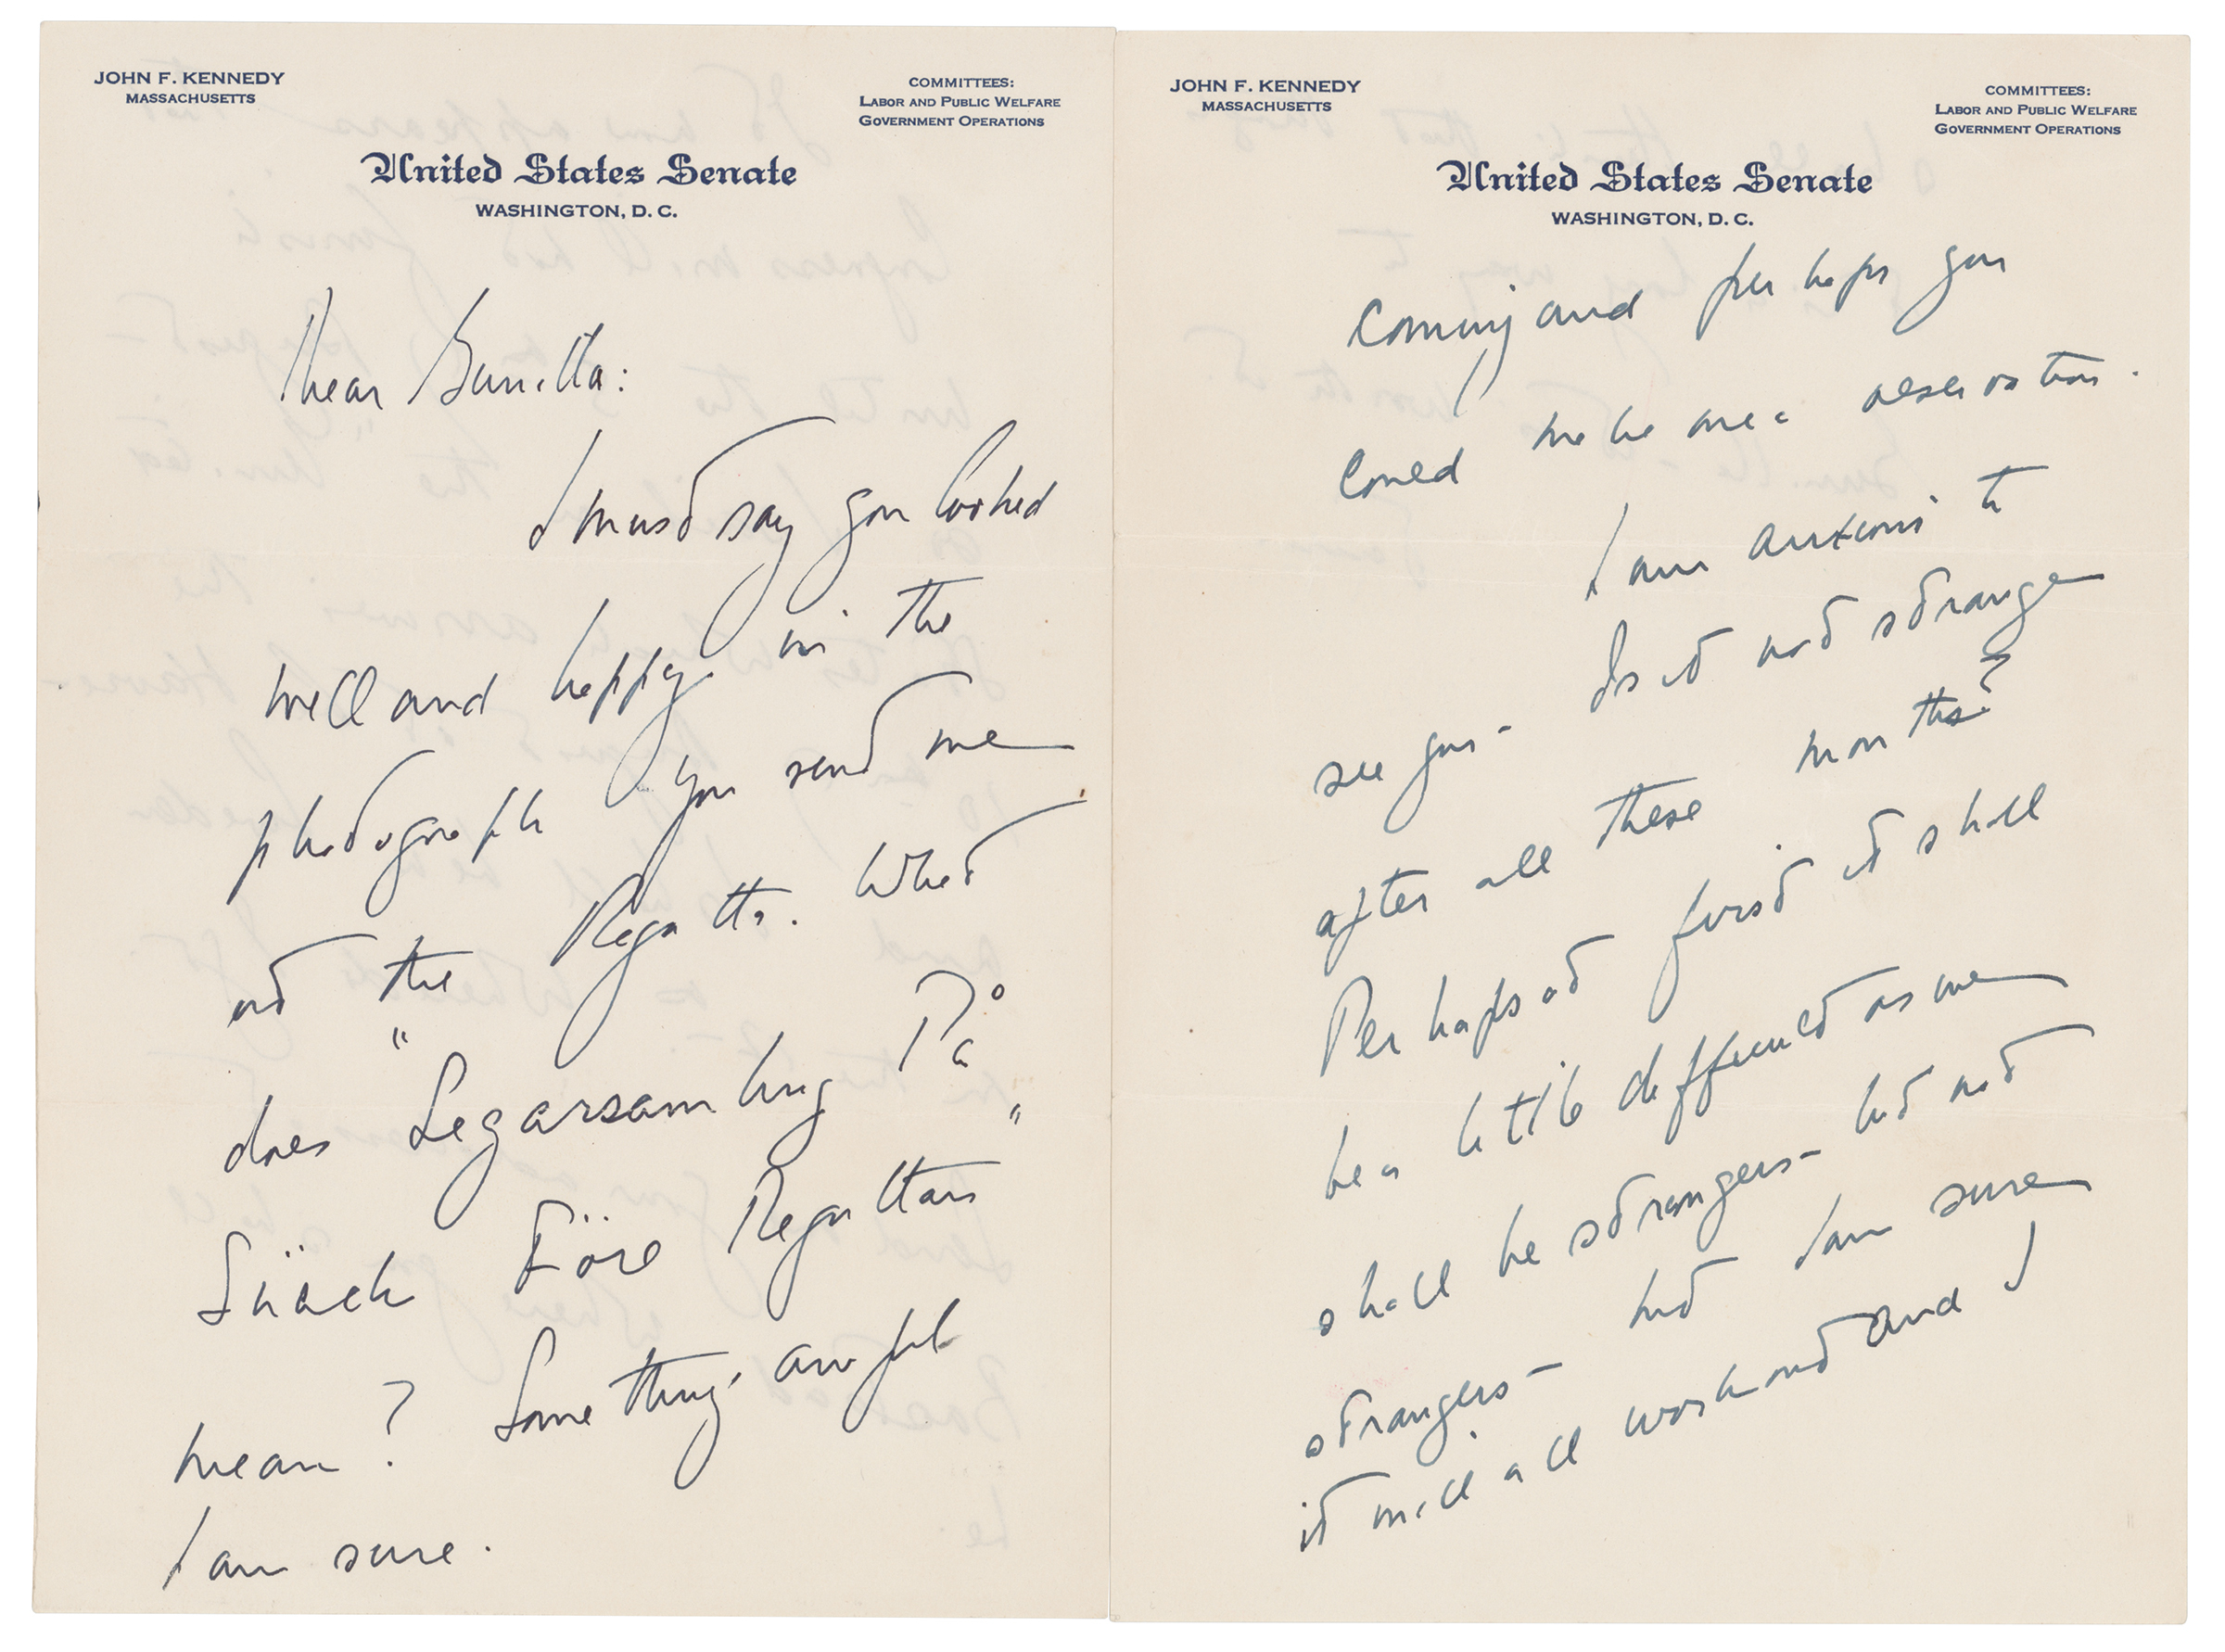 I Miss You Jfk S Intimate Letters To Swedish Mistress Up For Auction The Boston Globe